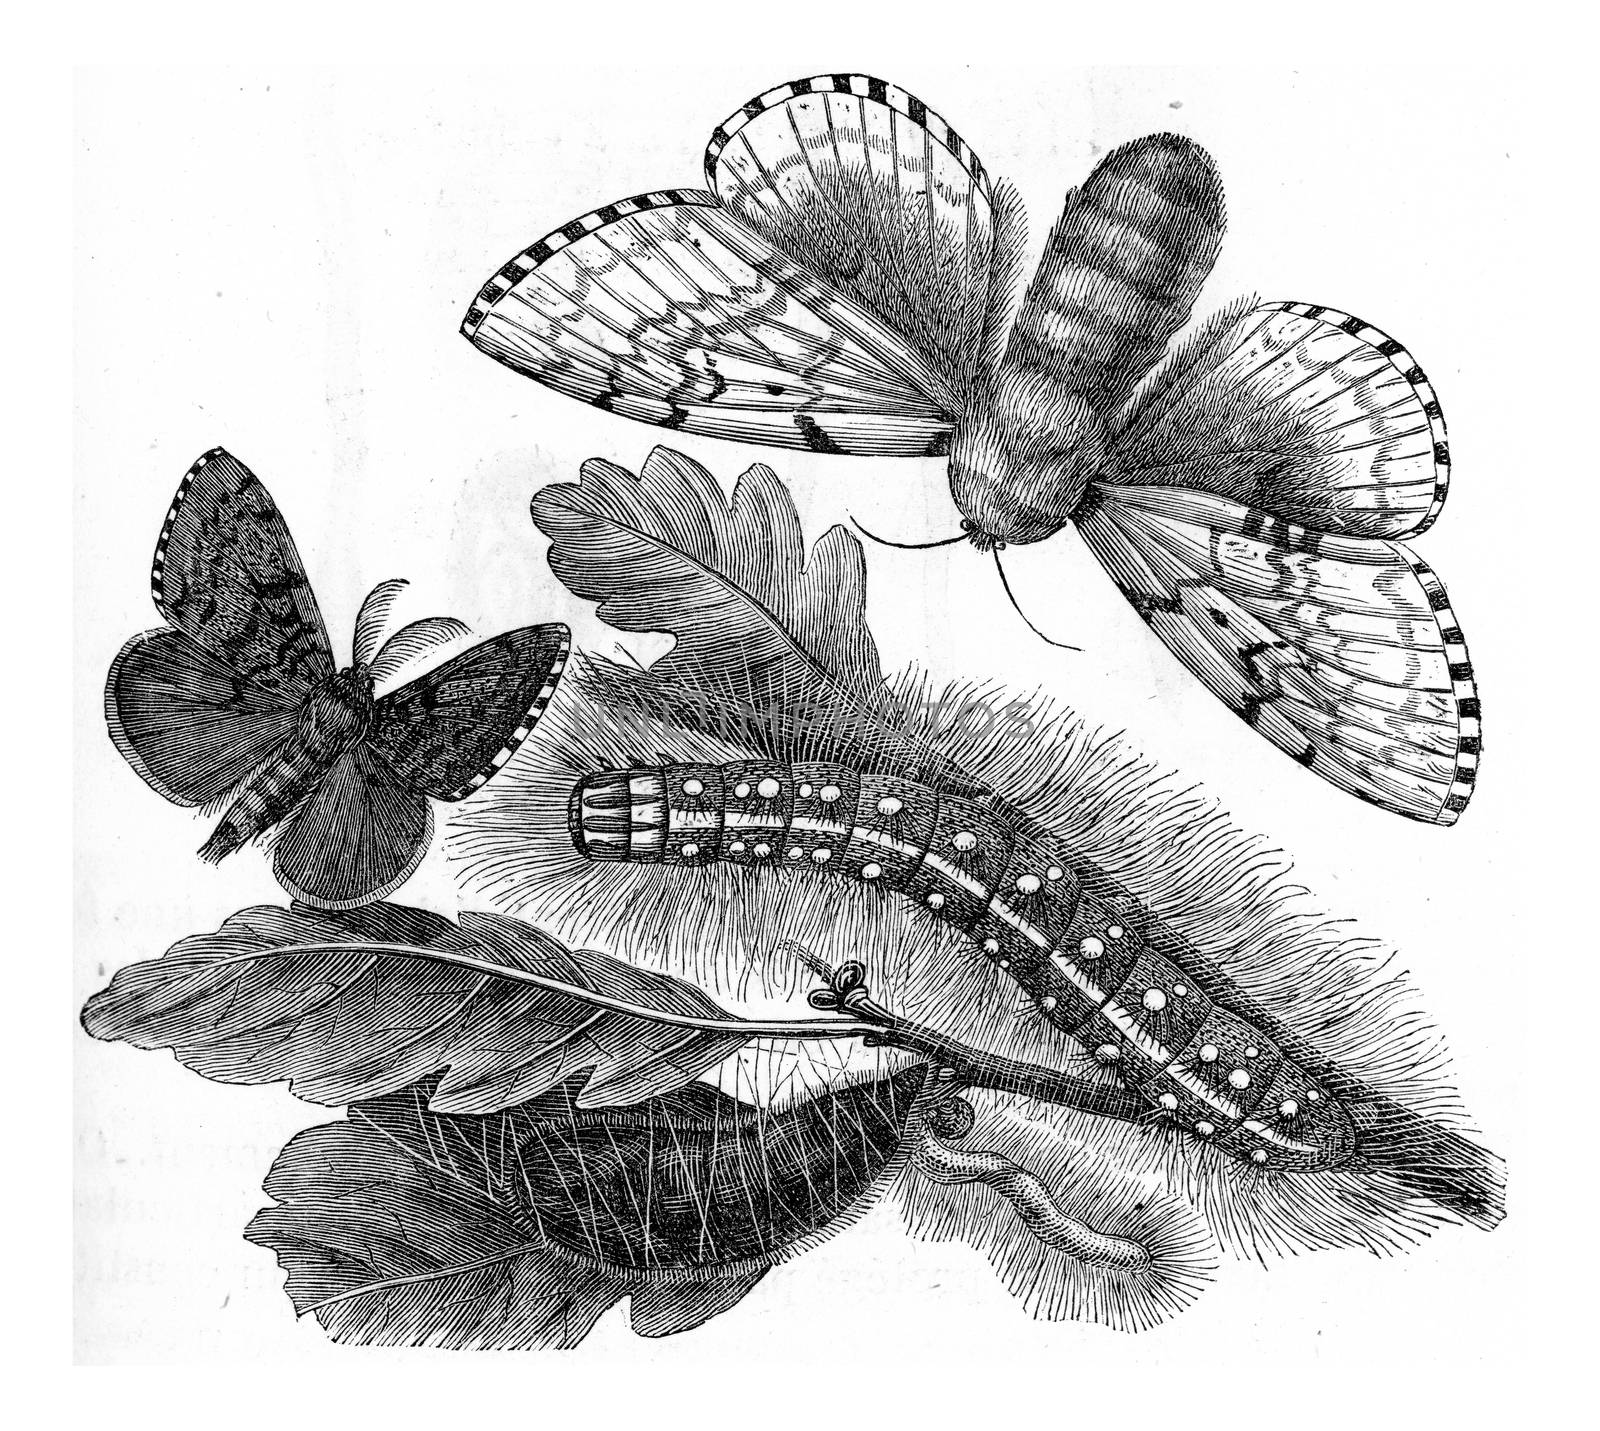 Bombyx dispar, vintage engraved illustration. From Zoology Elements from Paul Gervais
